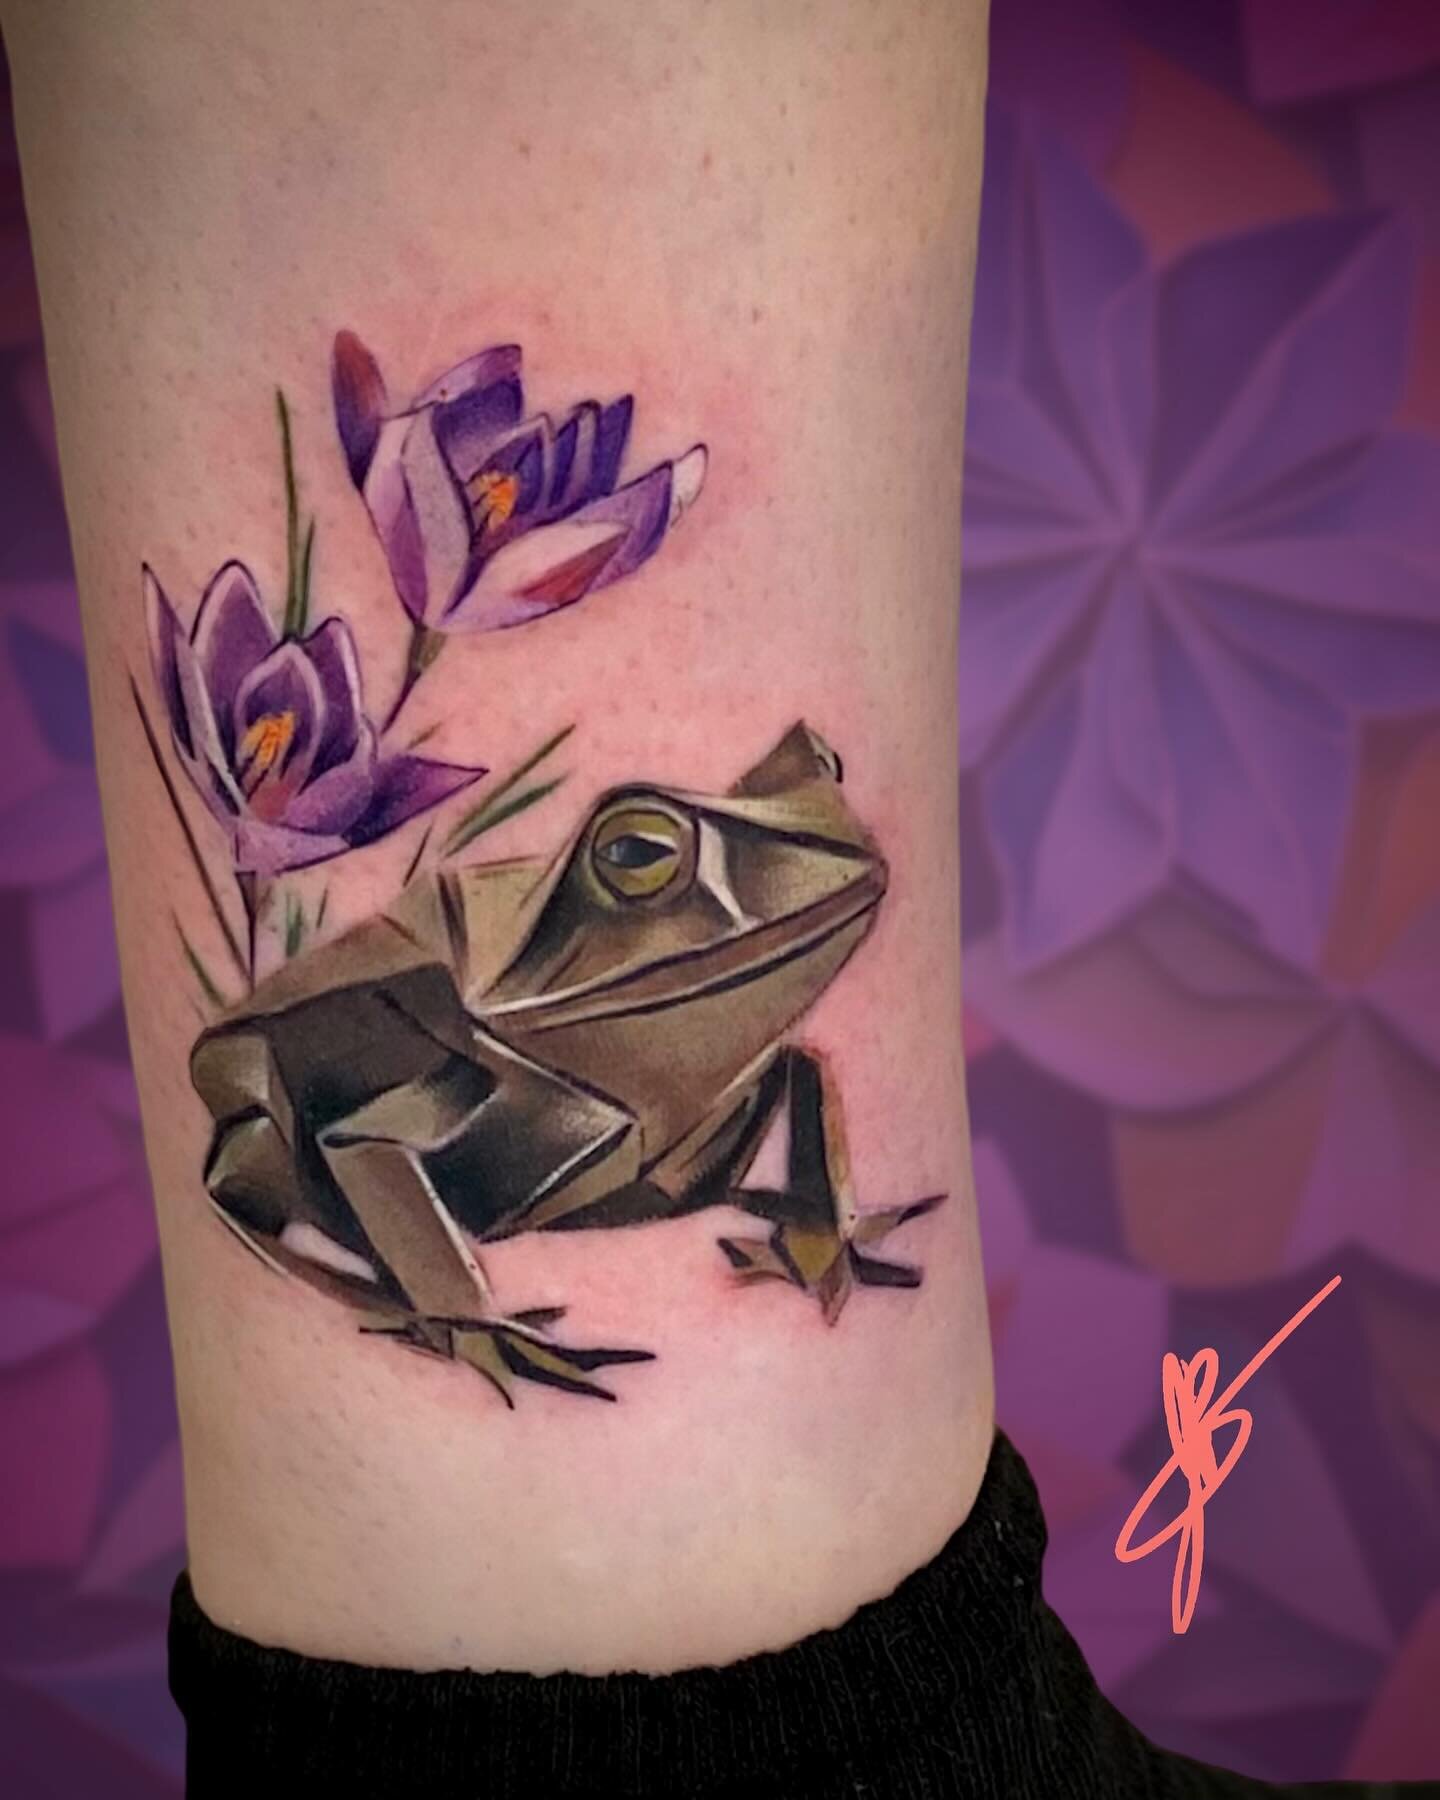 Origami Frog to remember a friend. ☺️ #origami #origamitattoo #tattoostyle #tatoos #tattoos_of_instagram